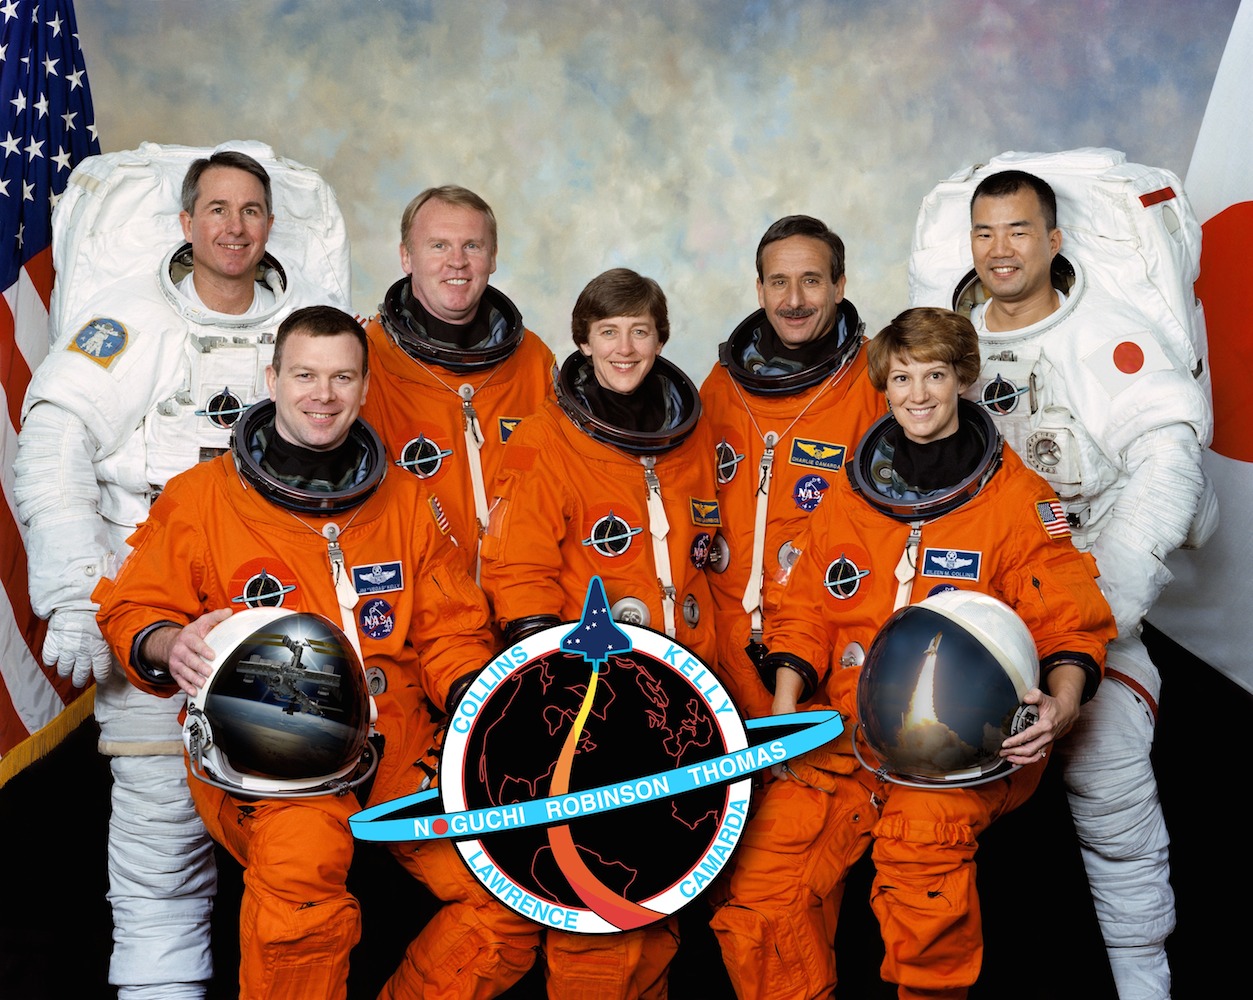 The team of STS-114, sent to space by NASA in July 2005